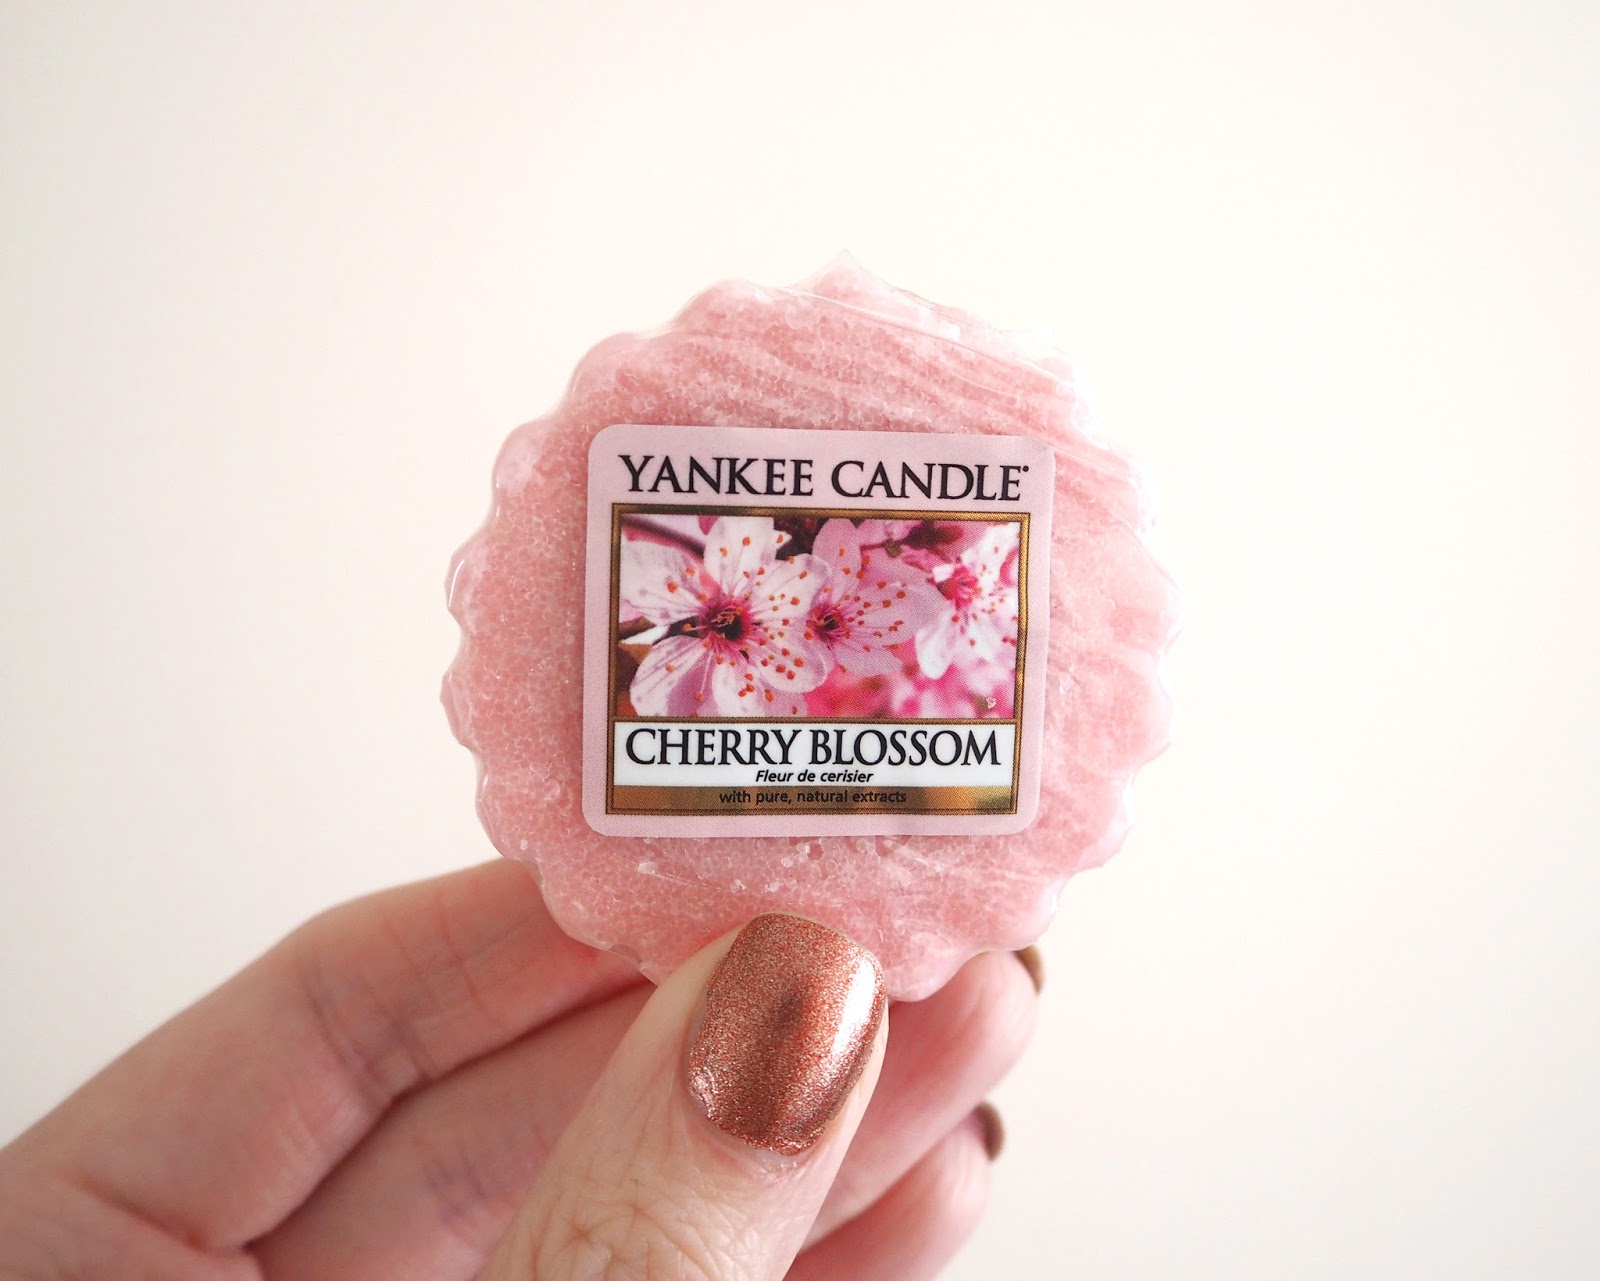 Yankee Candle Pure Essence Collection Review, Cherry Blossom, Fragrance Review, Candle Review, Yankee Candles, UK Blogger, Lifestyle Blogger, Katie Kirk Loves